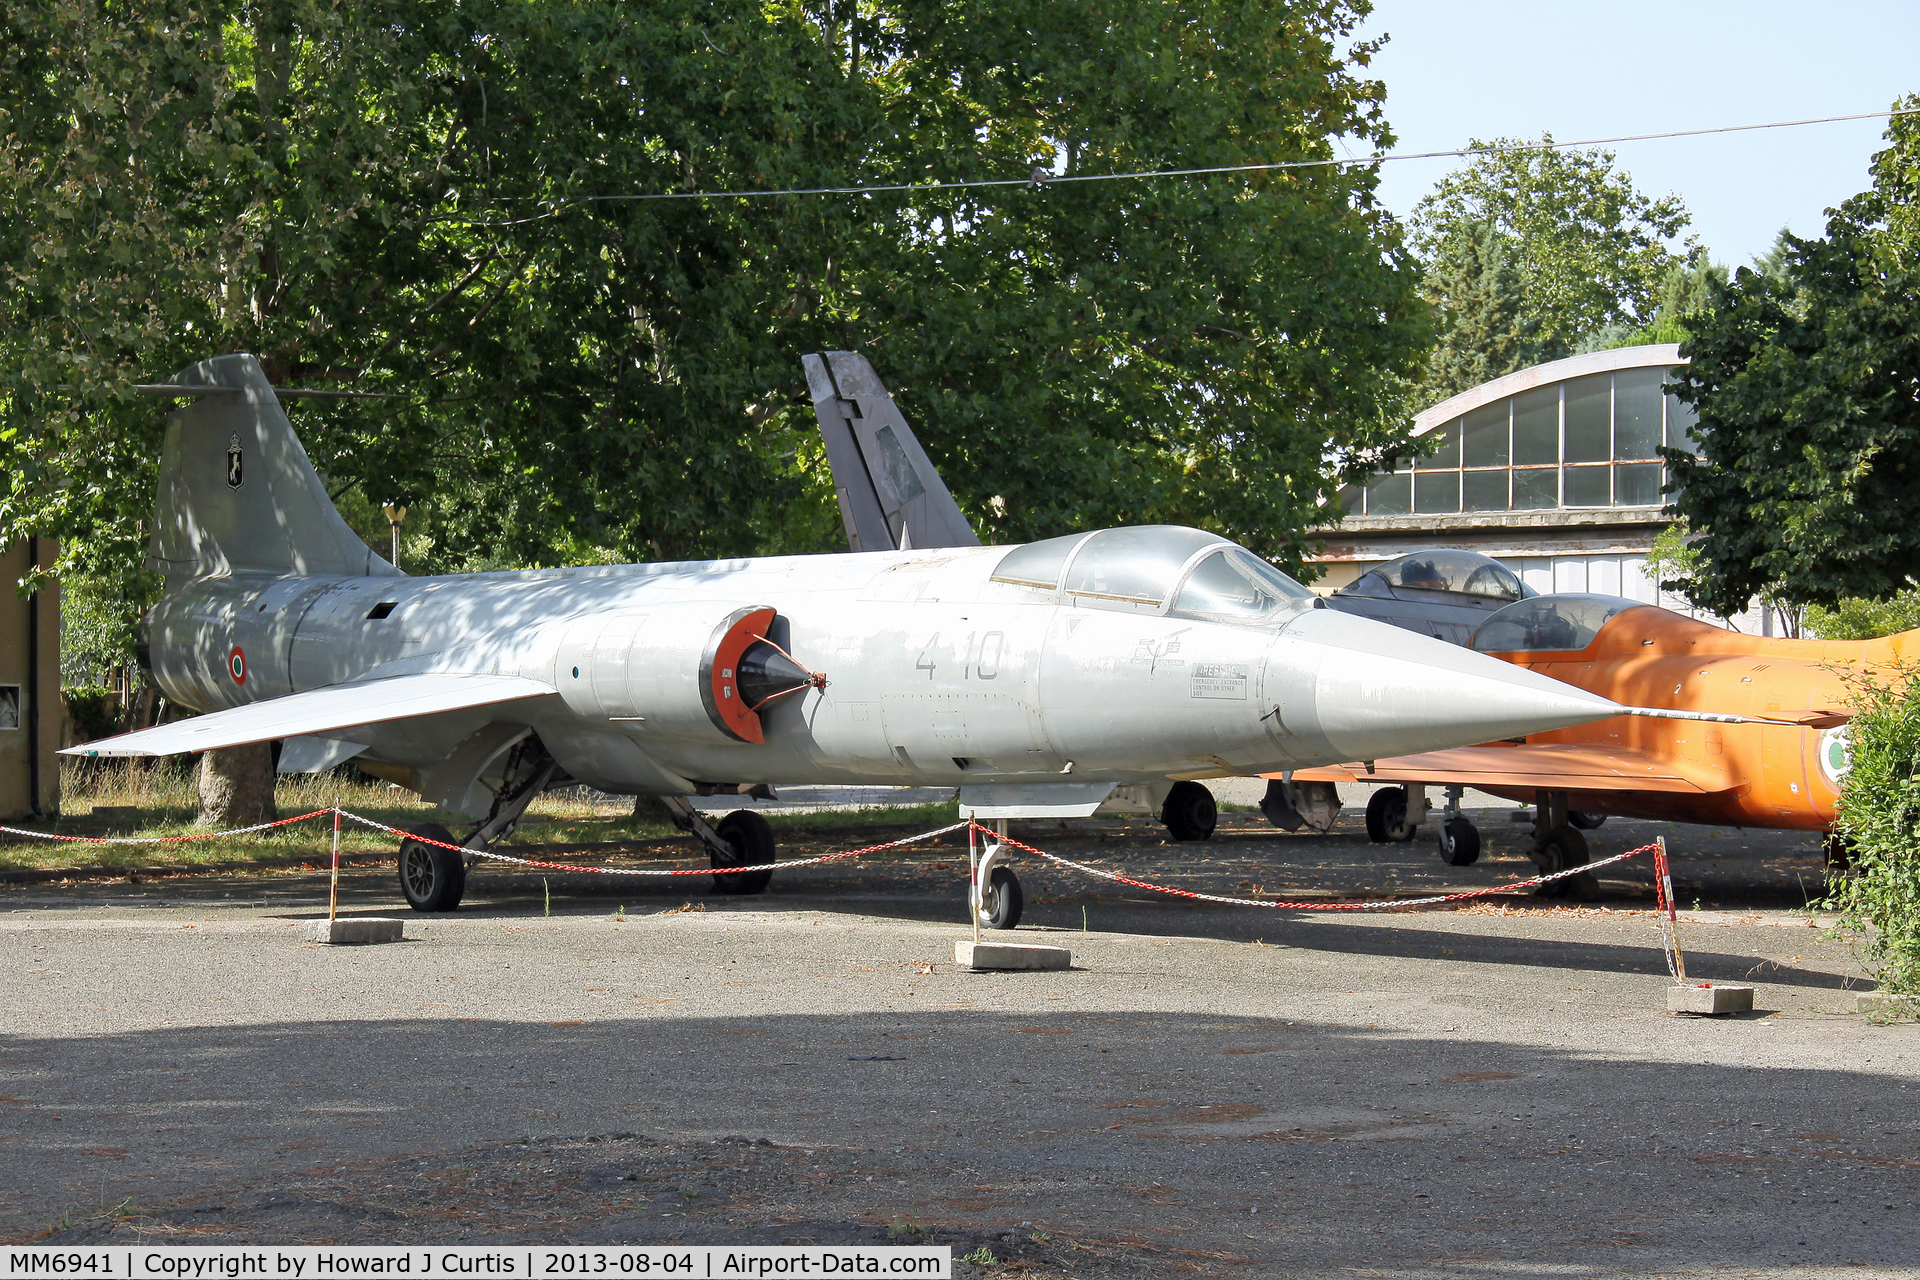 MM6941, Aeritalia F-104S-ASA Starfighter C/N 783-1241, In the grounds of the Da Vinci Technical Institute, Pisa, along with Sabre 4 MM19782 and MB.326 MM54153.